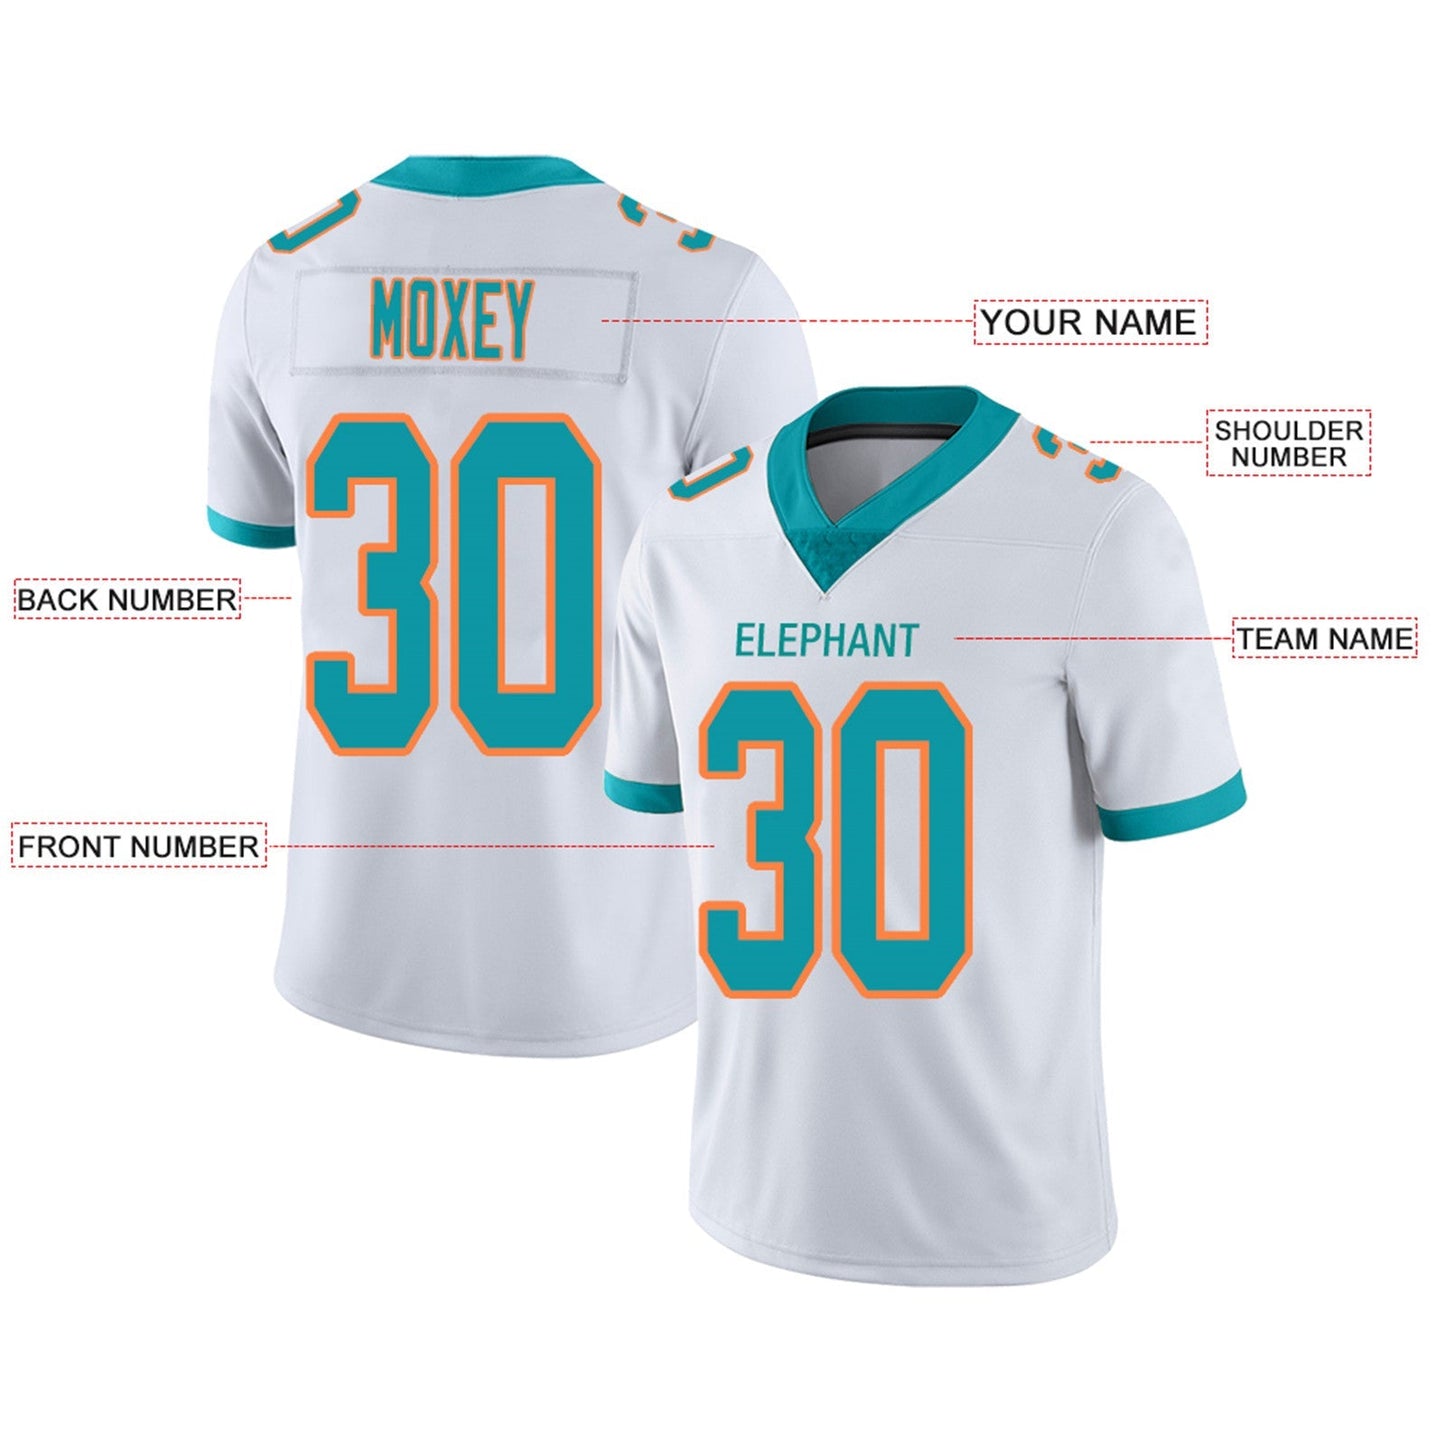 Custom M.Dolphins Football Jerseys Team Player or Personalized Design Your Own Name for Men's Women's Youth Jerseys Aqua